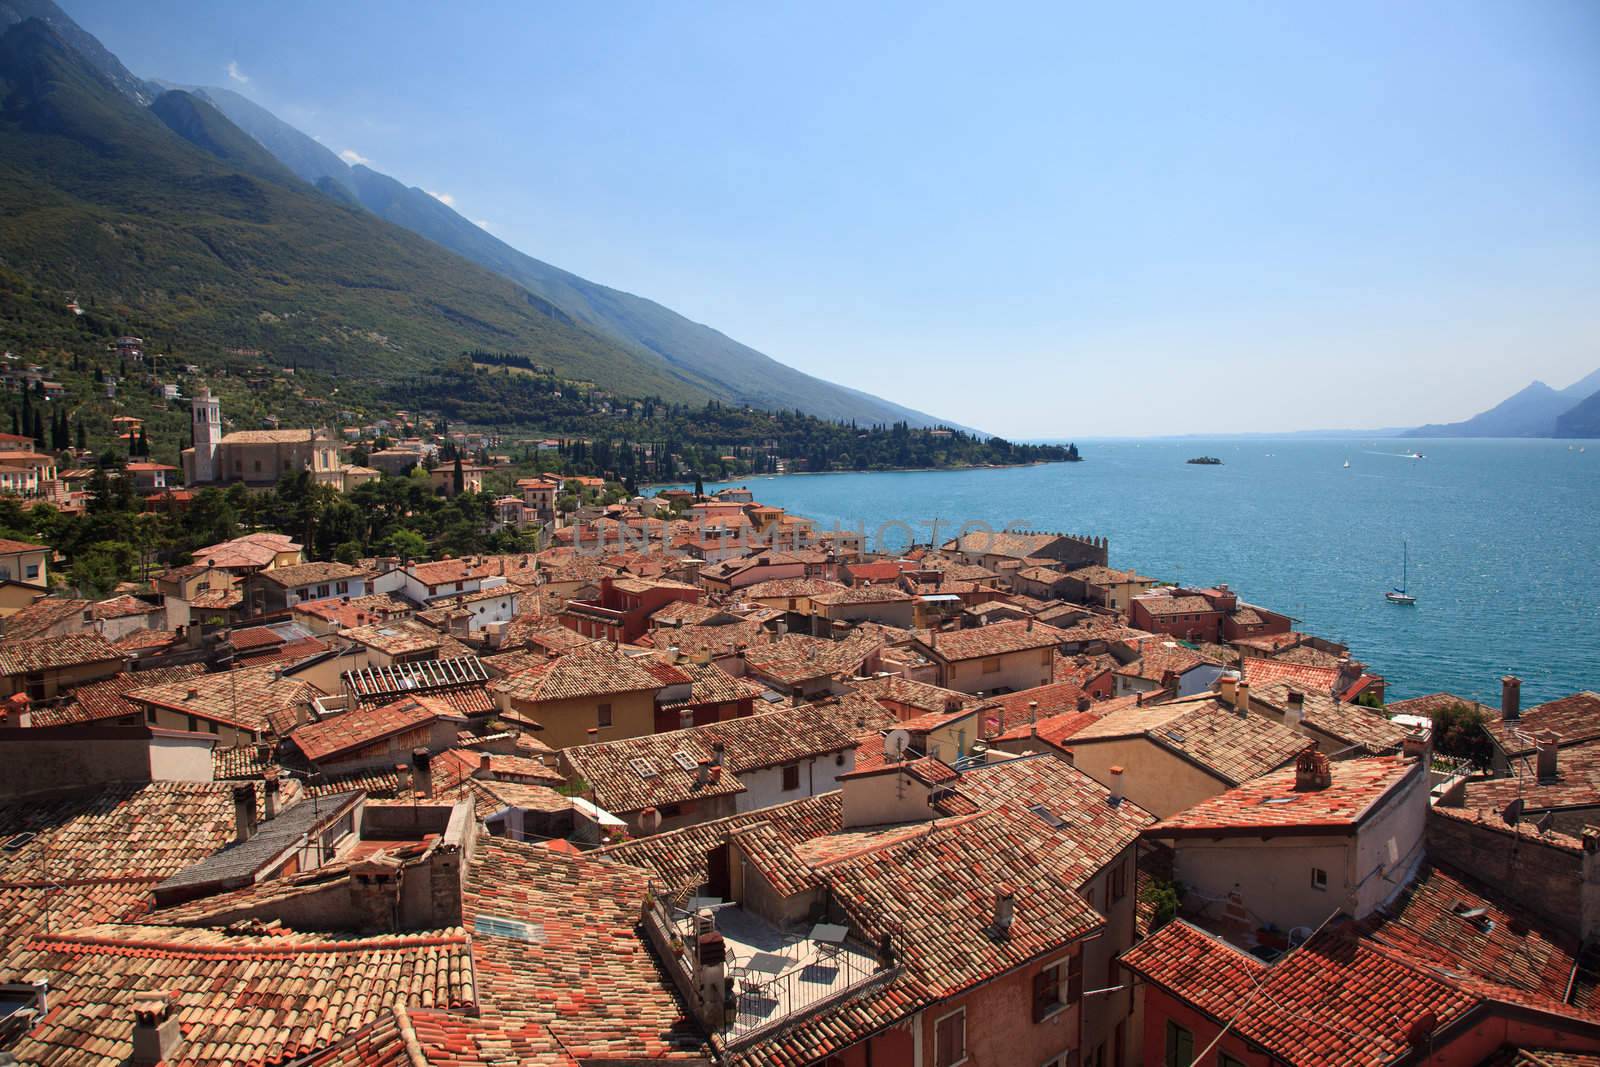 Tiled roofs of Malcesine by steheap